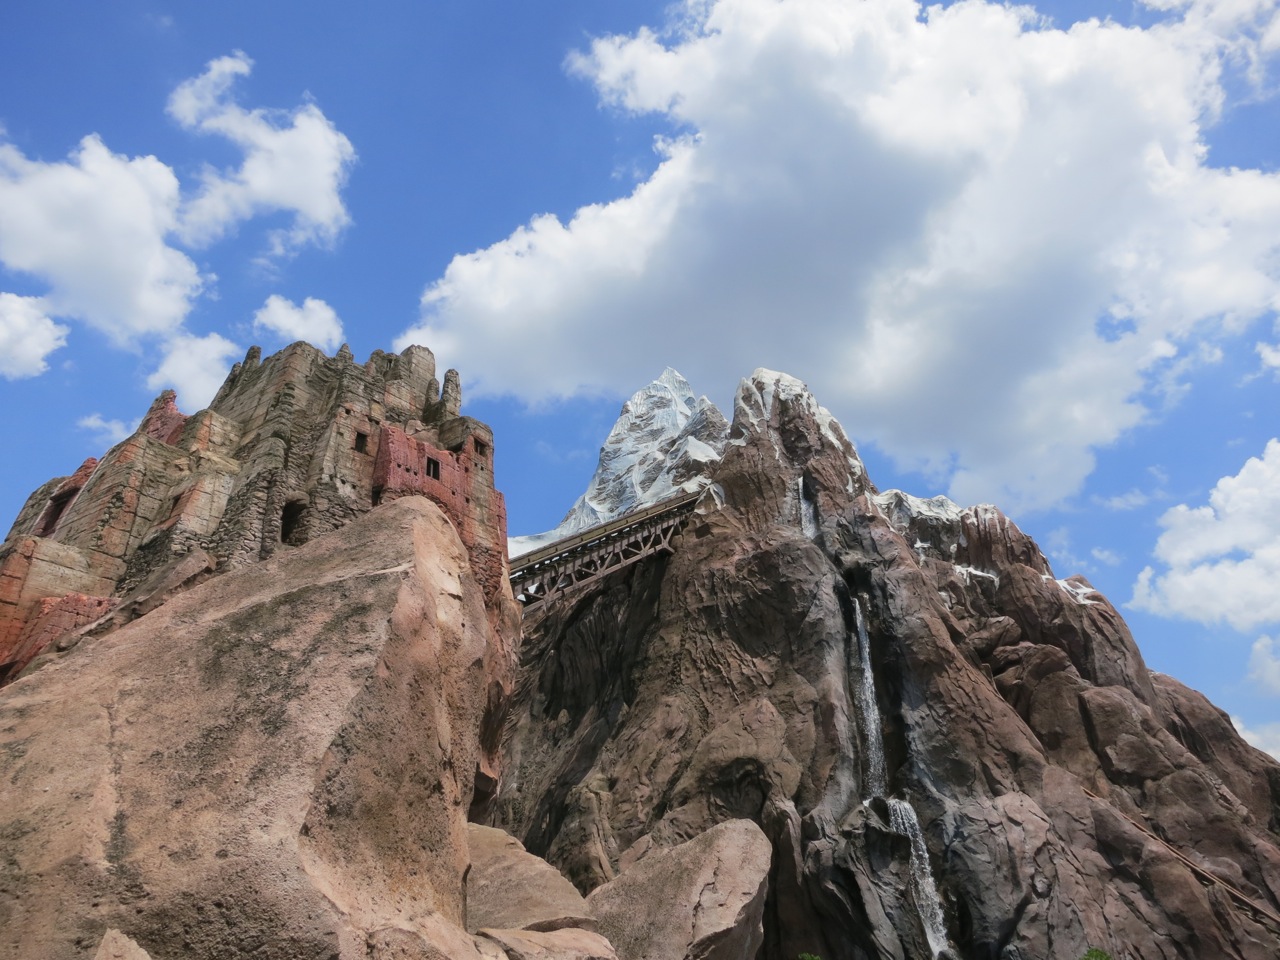 Expedition-Everest-203